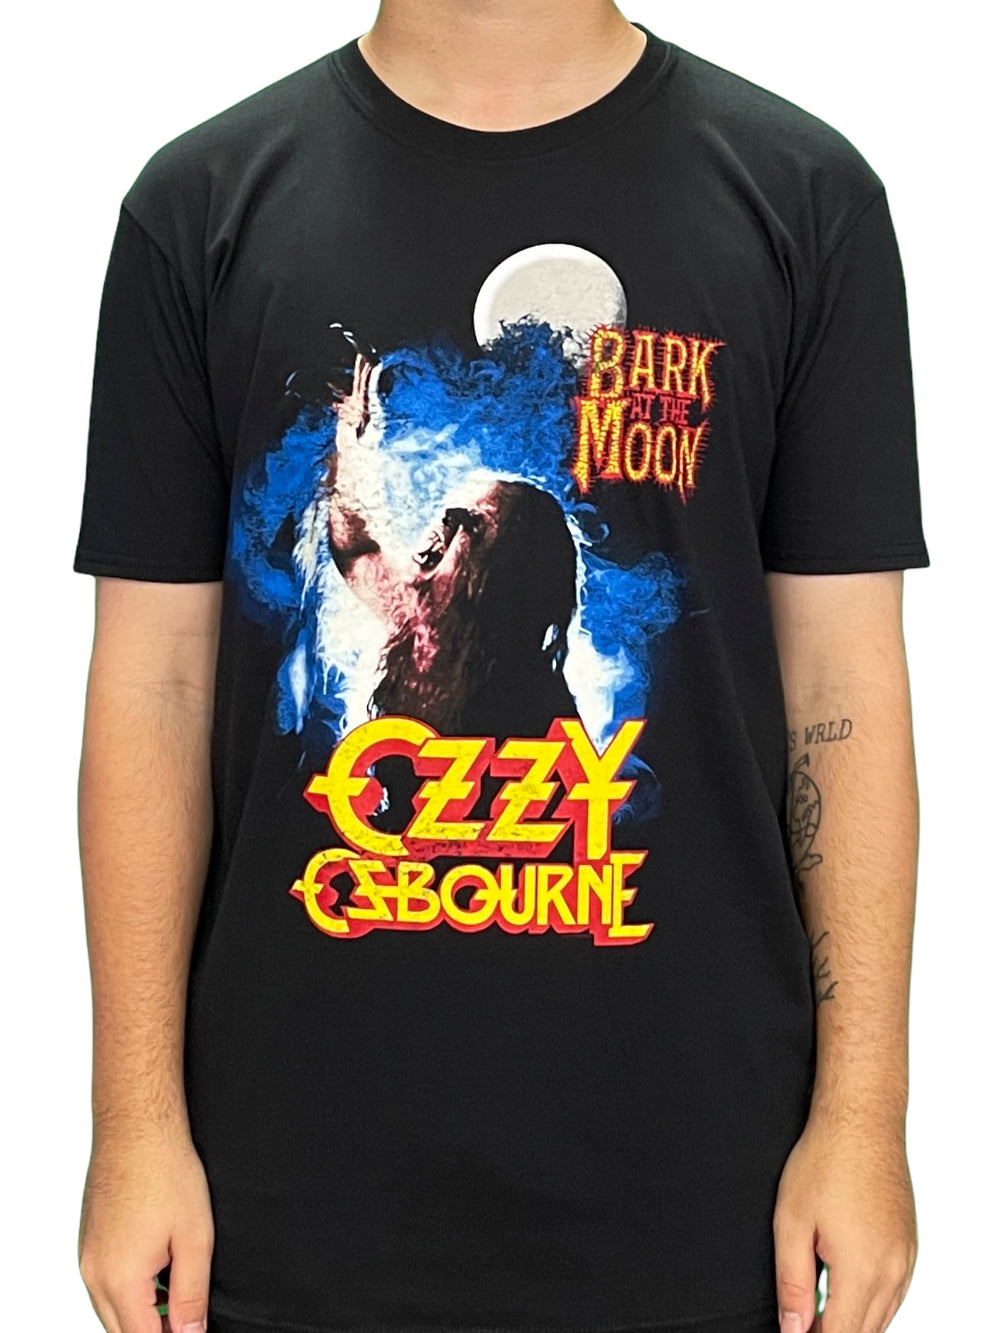 Ozzy Osbourne Bark At the Moon Official Unisex T Shirt Brand New Various Sizes